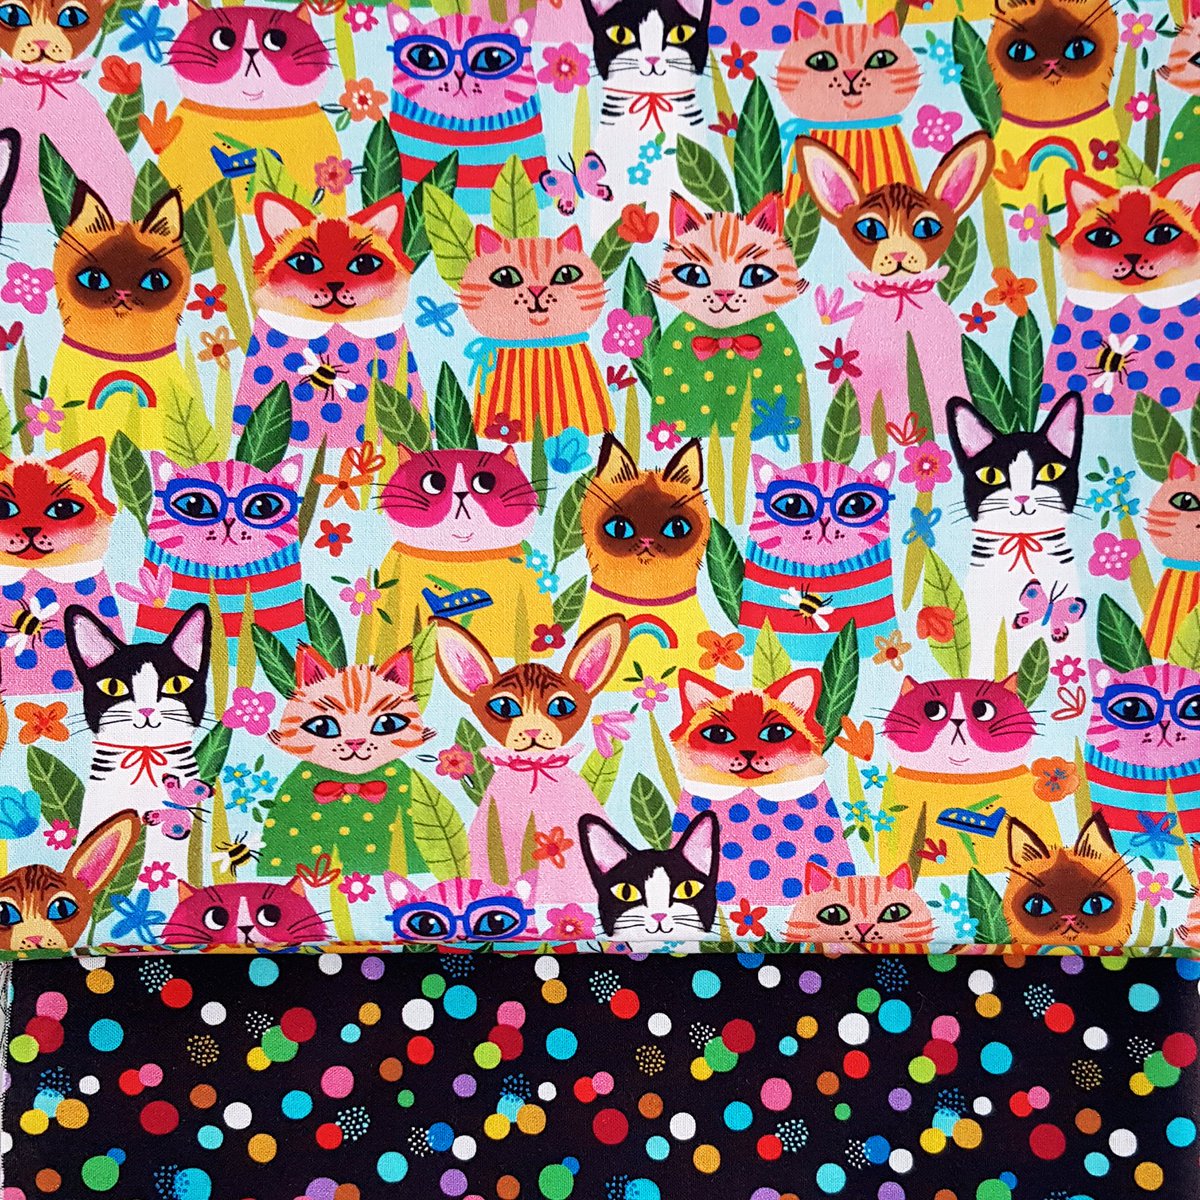 Puddycats! Love how the design looks on printed fabric 🐱
#cats #catfabric #patterndesigner #illustrator